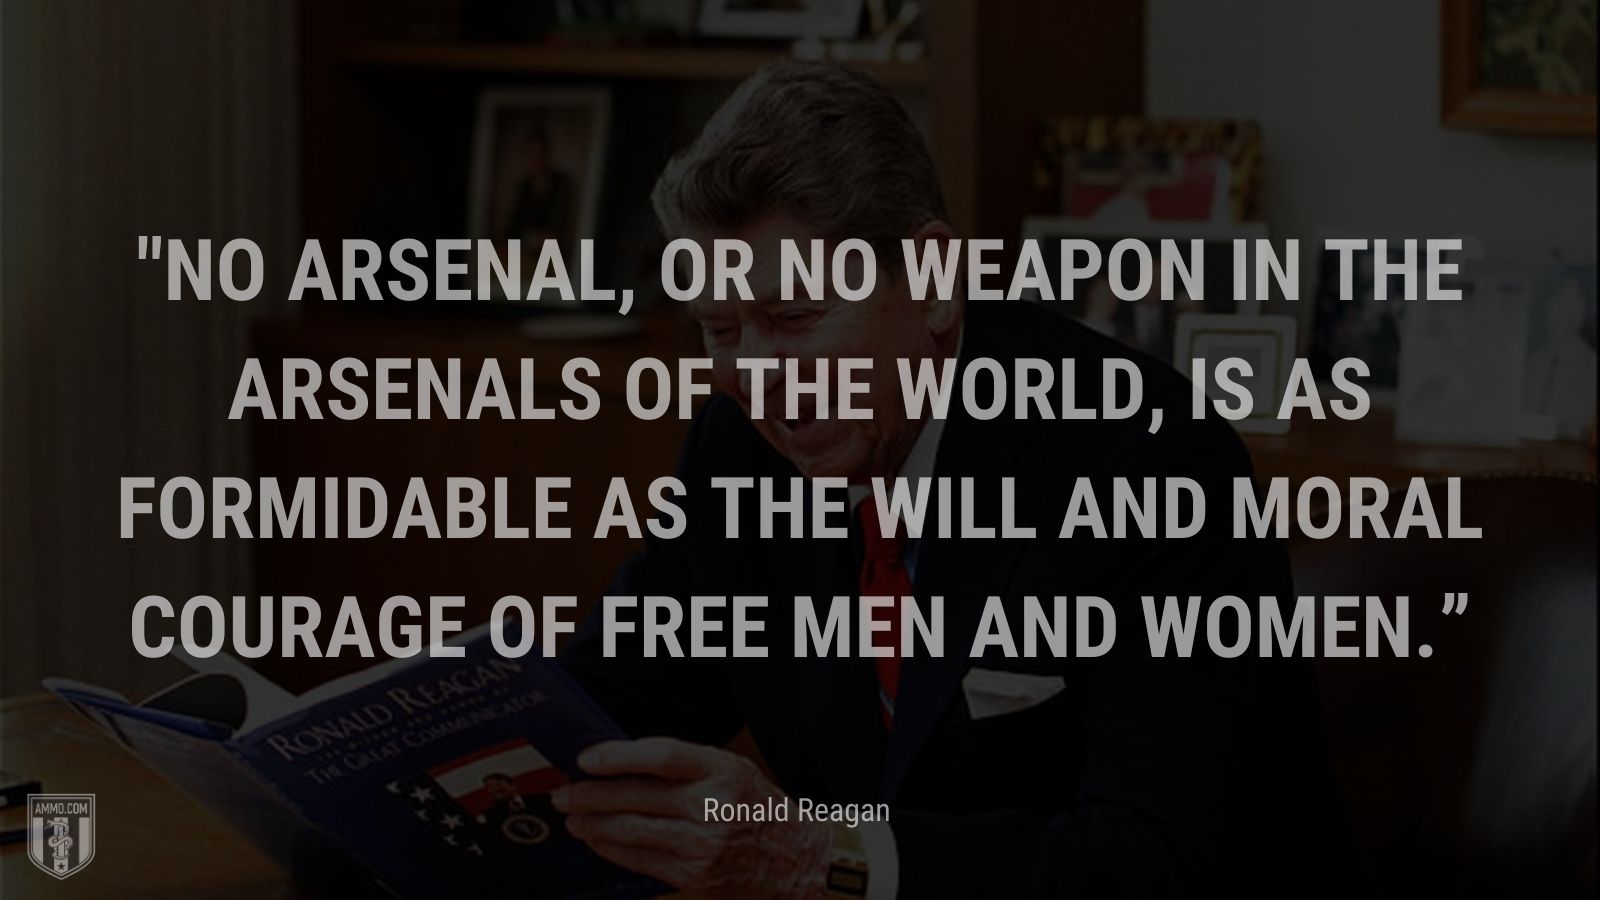 “No arsenal, or no weapon in the arsenals of the world, is as formidable as the will and moral courage of free men and women.” - Ronald Reagan